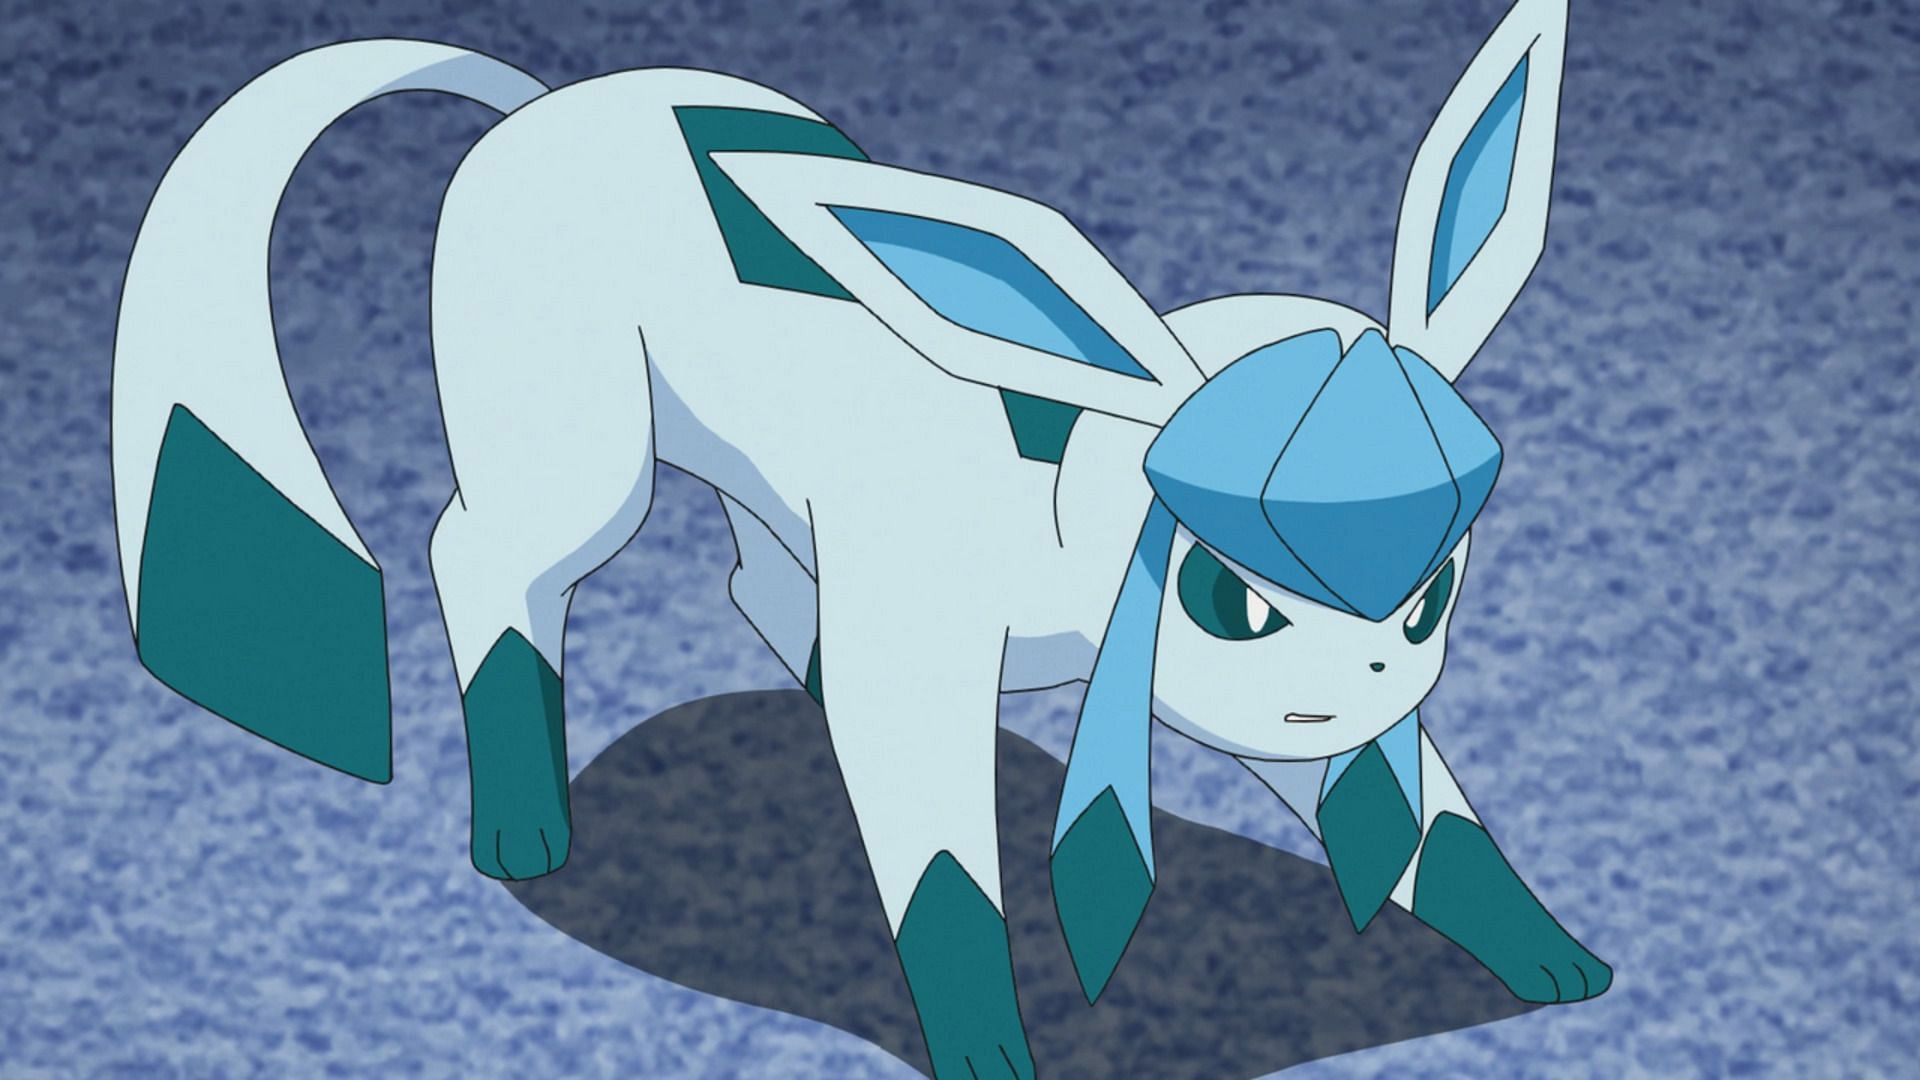 Glaceon as seen in the anime (Image via The Pokemon Company)